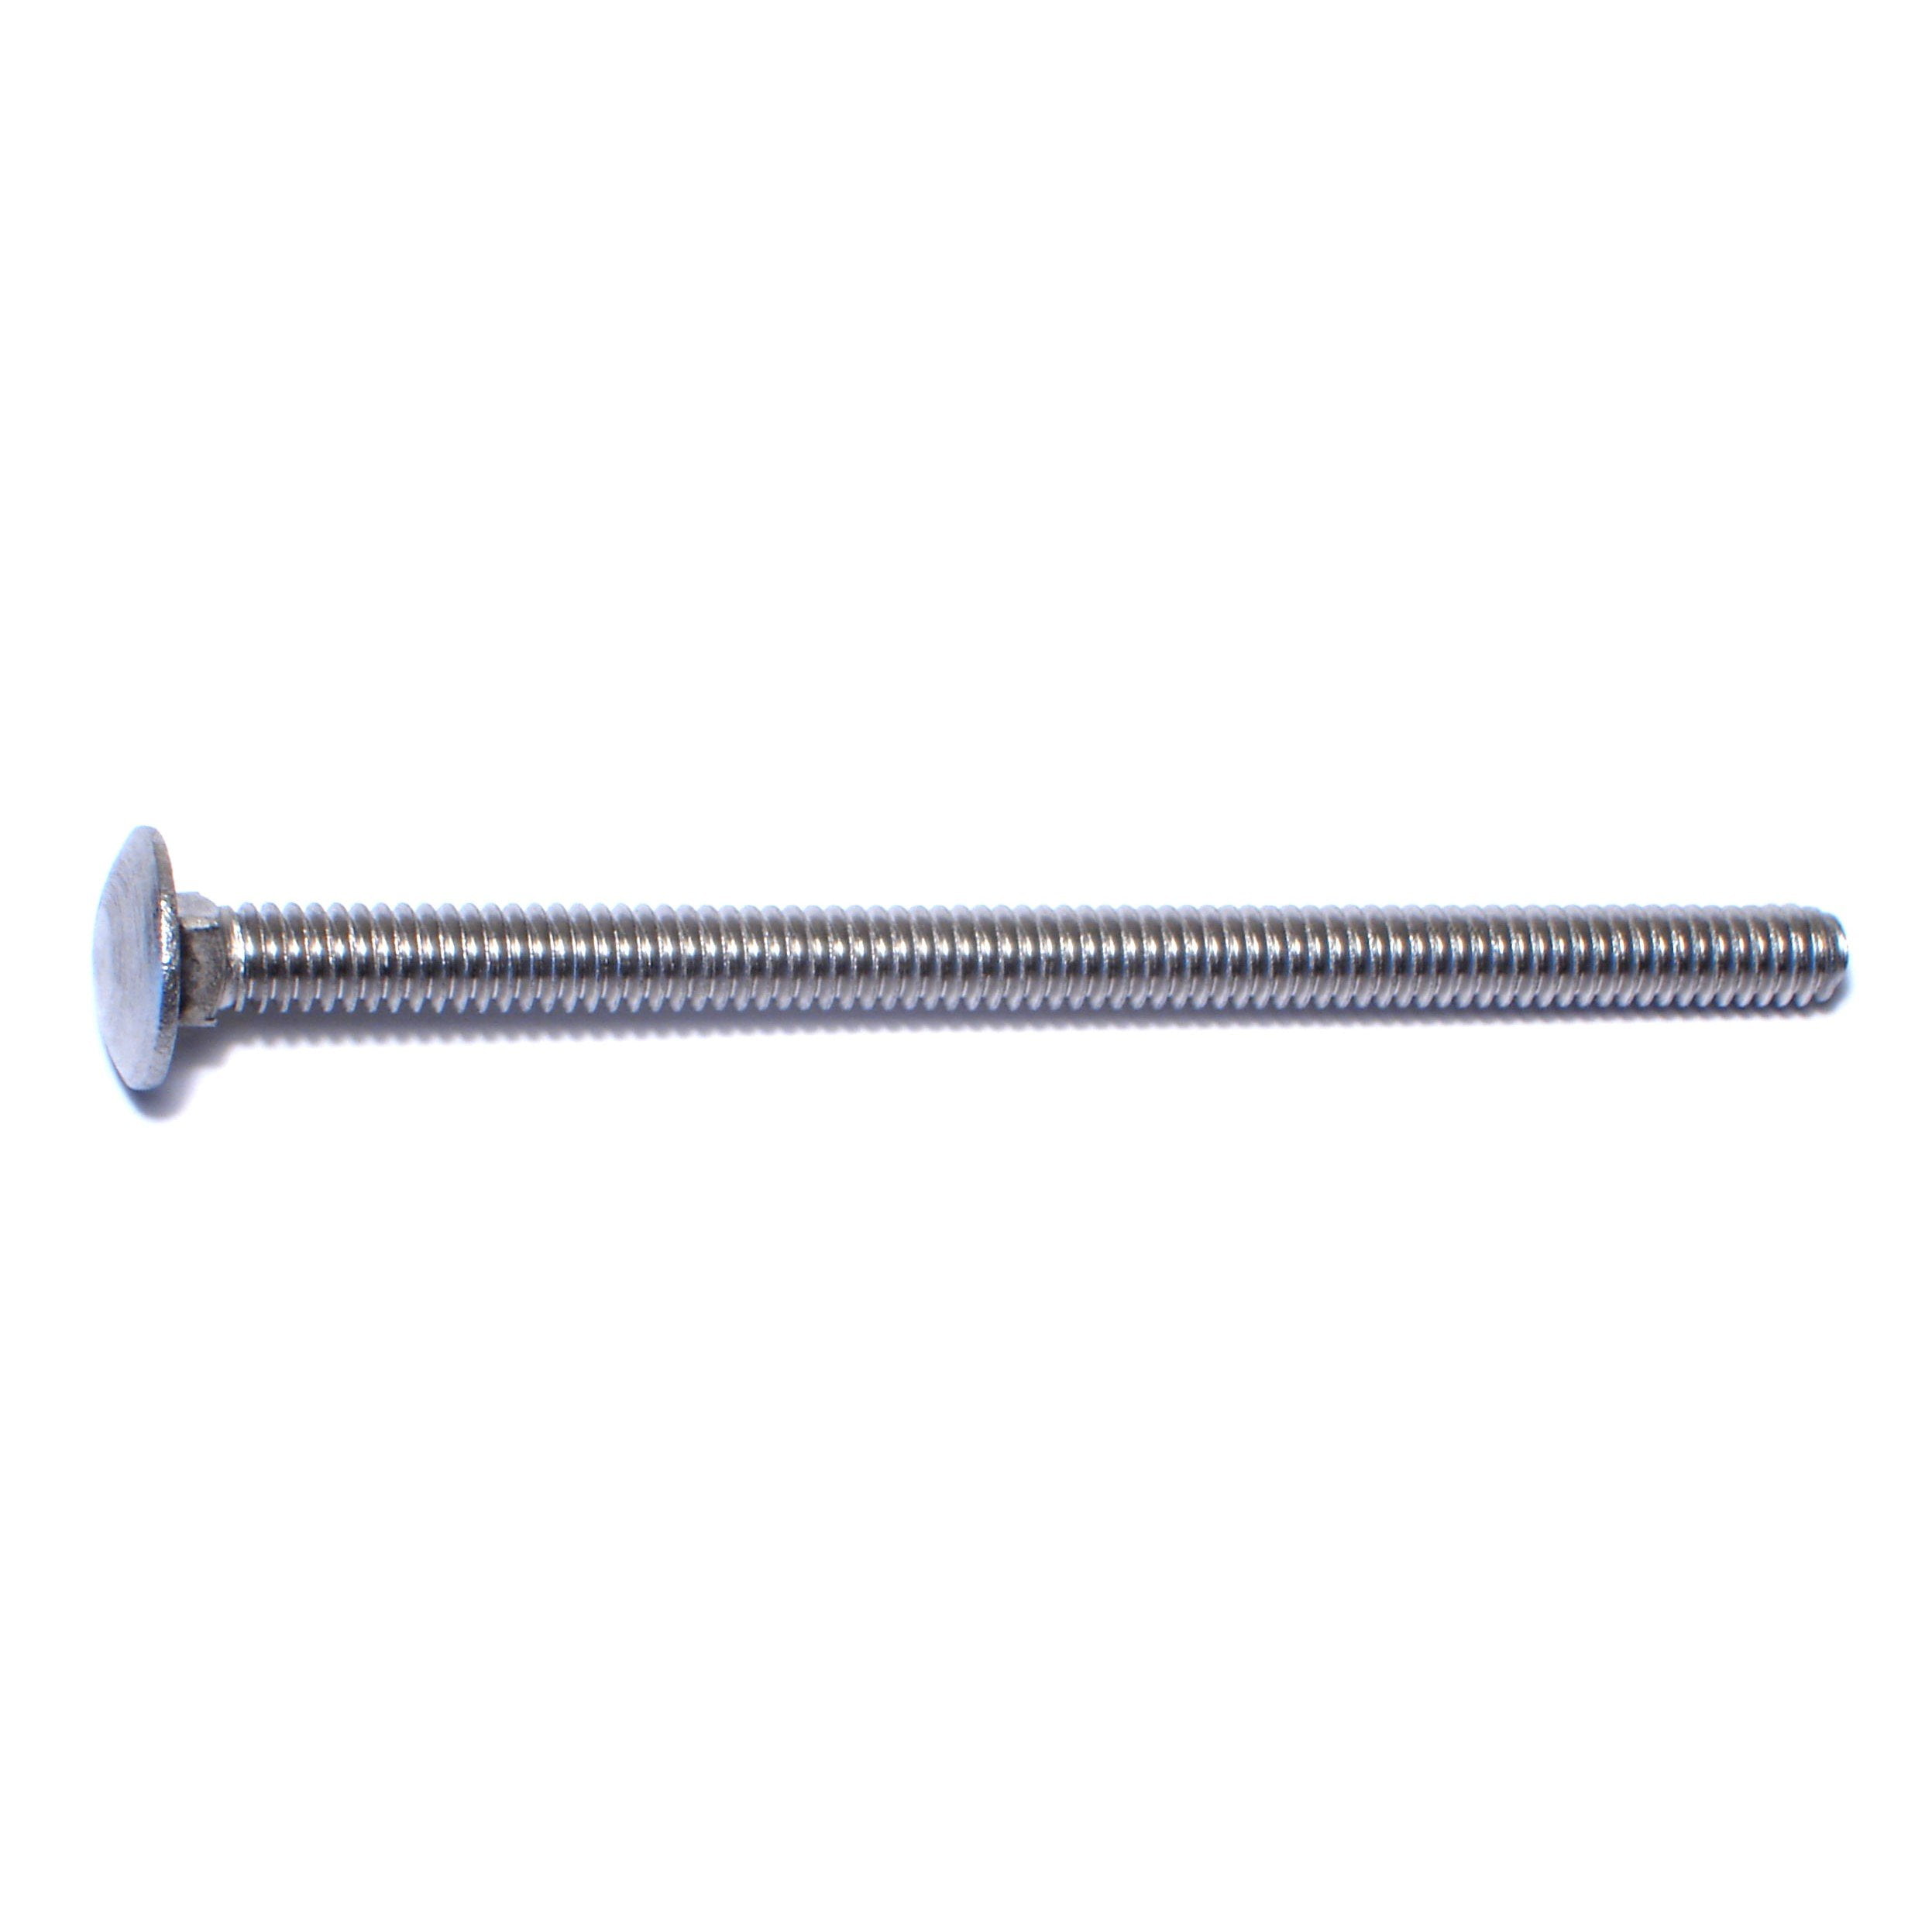 1/4-20 Stainless Steel Square Nuts 1/4x20 Nut 1/4 x 20 Coarse Thread 100 